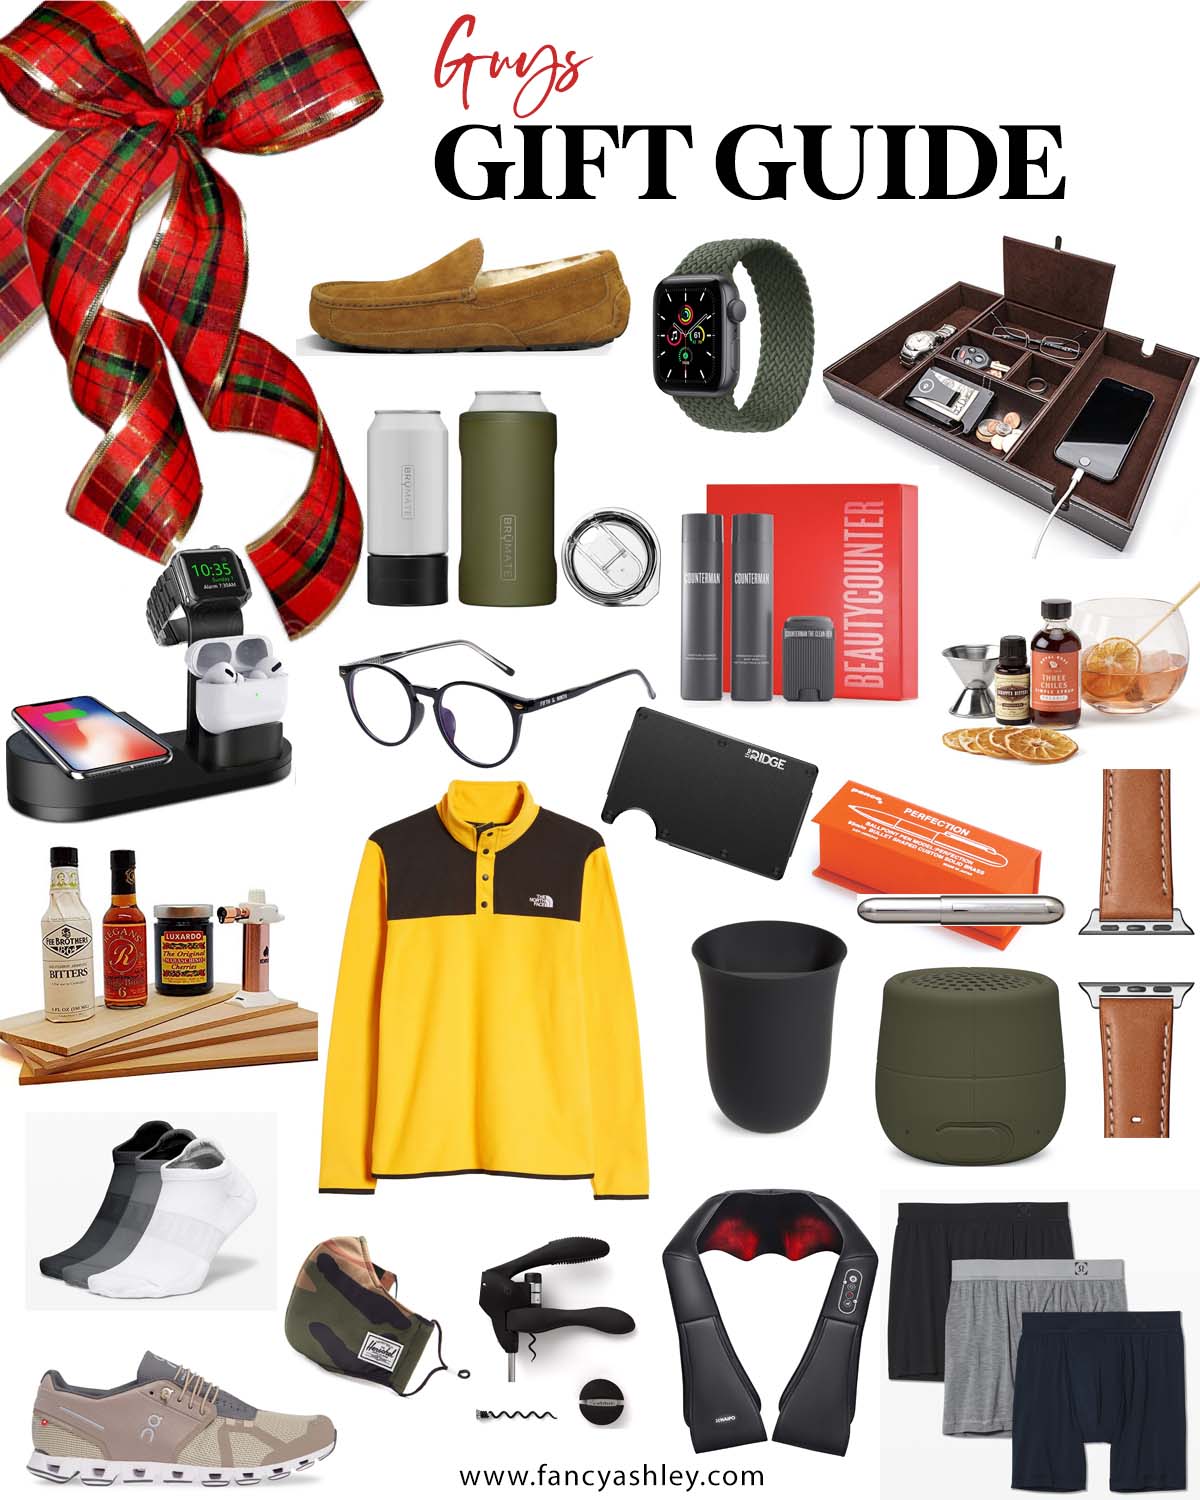 Gift Ideas for Men by popular Houston life and style blog, Fancy Ashley: collage image of blue light glasses, watch band, socks, face mask, charging station, neck massager, slippers, boxer briefs, bbq sauce set, desk organizer, portable speaker, bullet pen, Beauty Counter for men and Northface pullover.